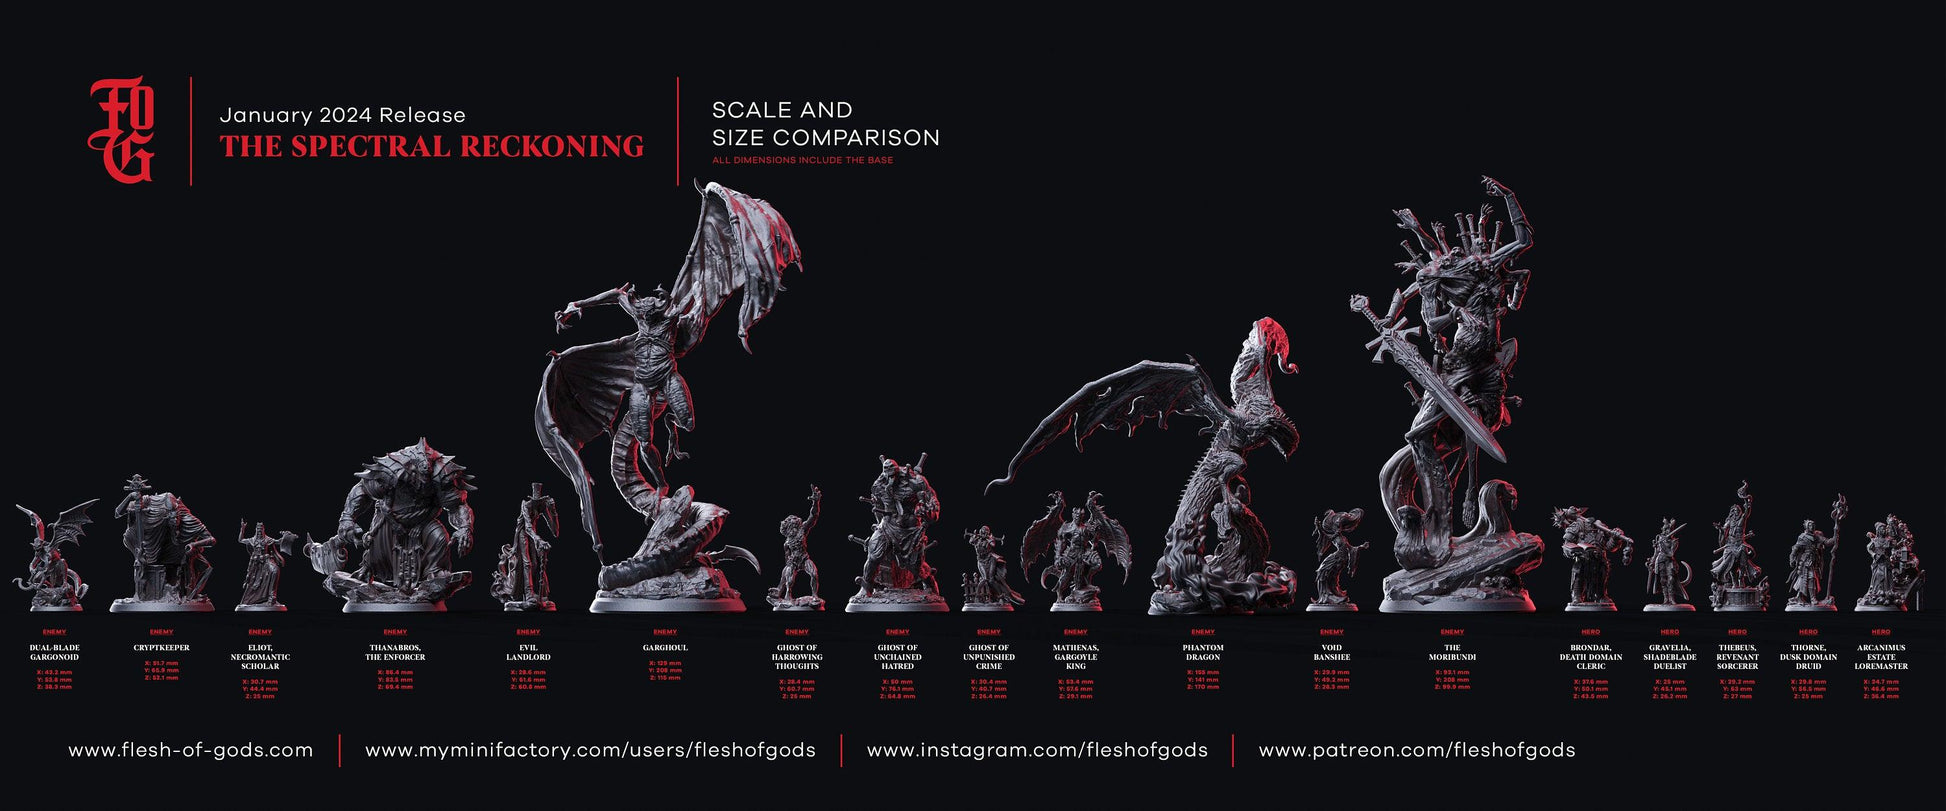 Cryptkeeper Miniature | Graveyard NPC & Undead Monster for Dungeons and Dragons | 50mm Base - Plague Miniatures